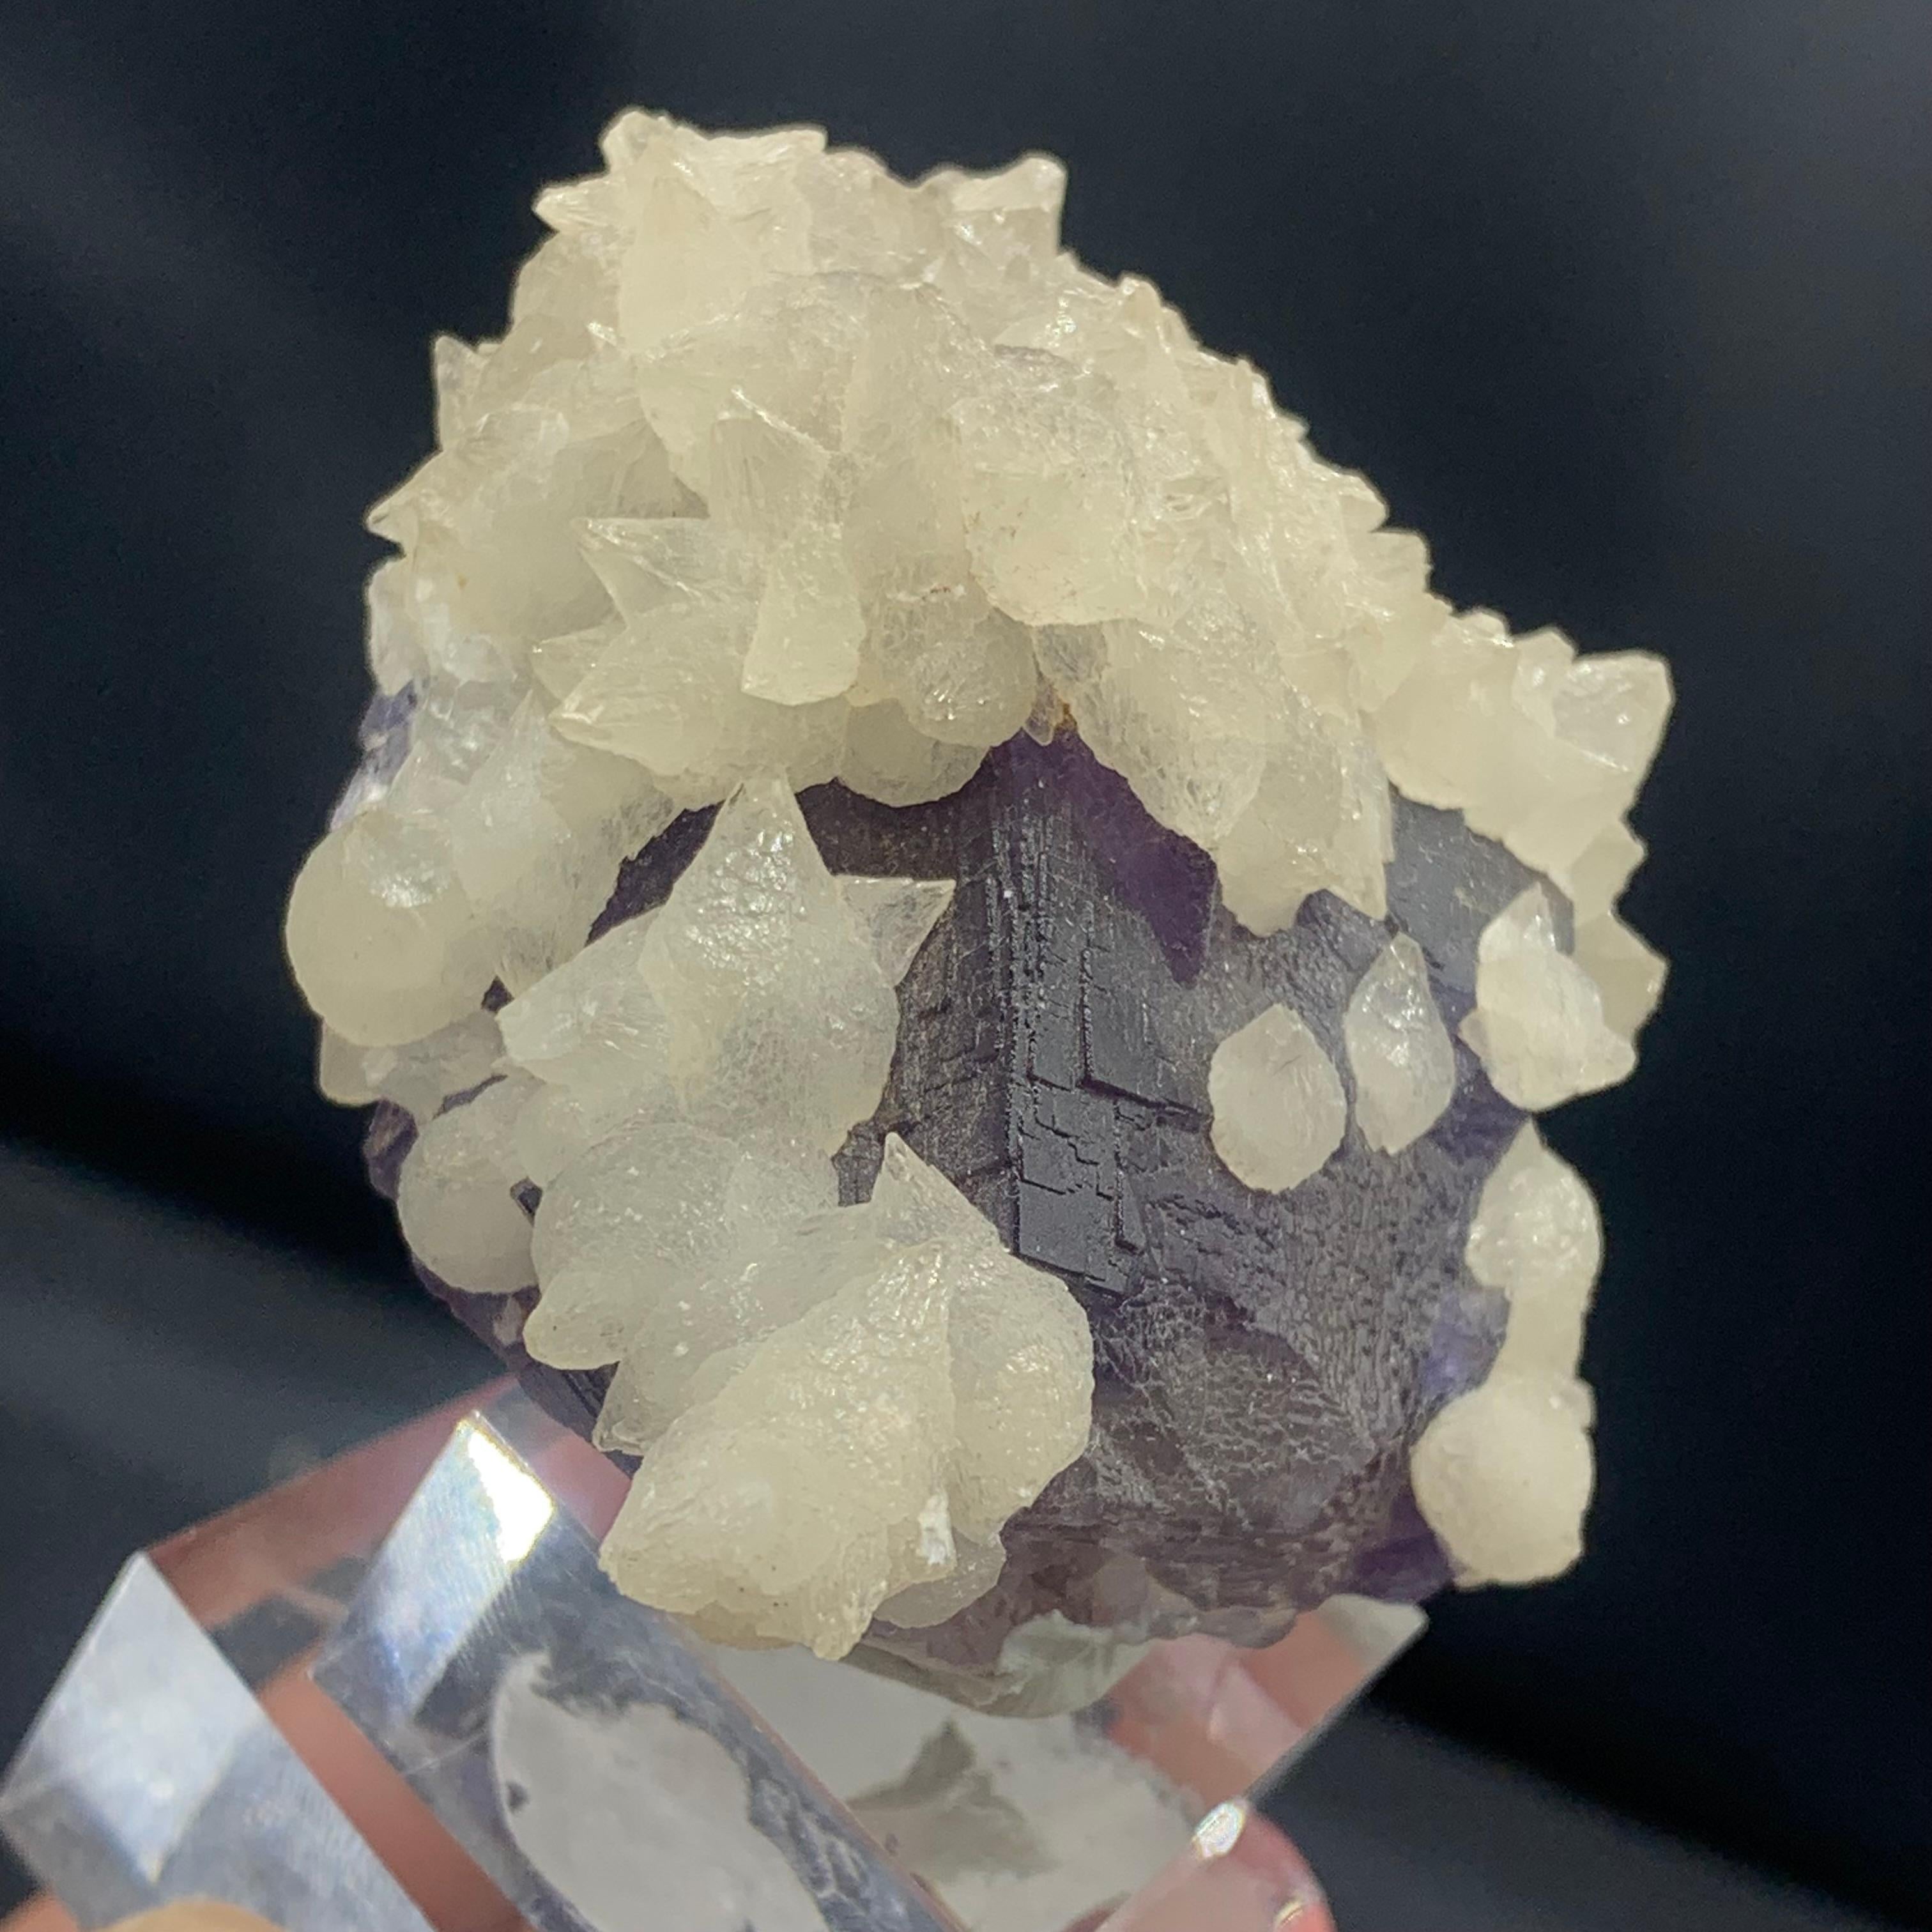 Glamorous Fluorite specimen with dog tooth from Pakistan 
WEIGHT: 162.08 grams
DIMENSIONS: 5.9 x 5.6 x 3.4 Cm
ORIGIN : Pakistan
TREATMENT None

The Fluorite meaning comes from the Latin word for flux, referring to the gems ability to flow in